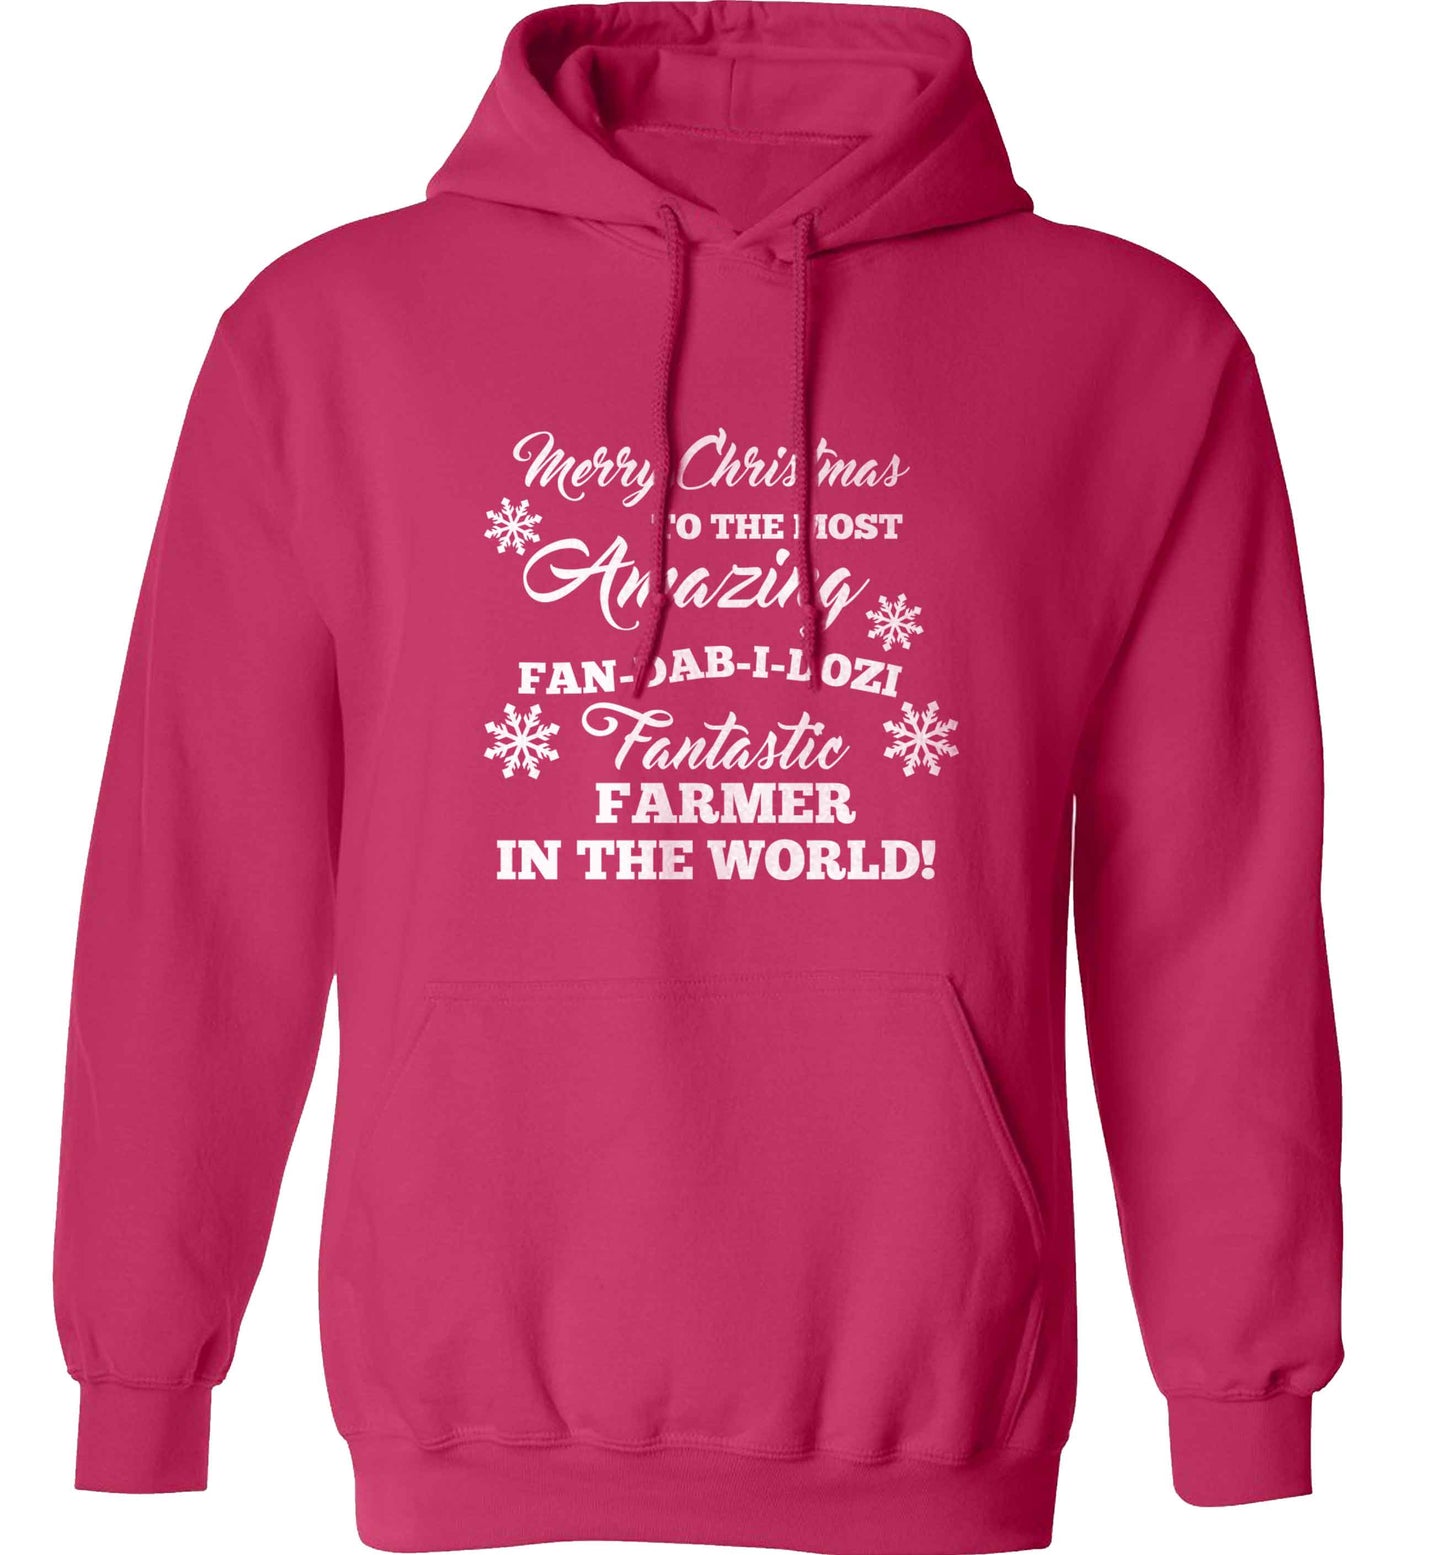 Merry Christmas to the most amazing farmer in the world! adults unisex pink hoodie 2XL